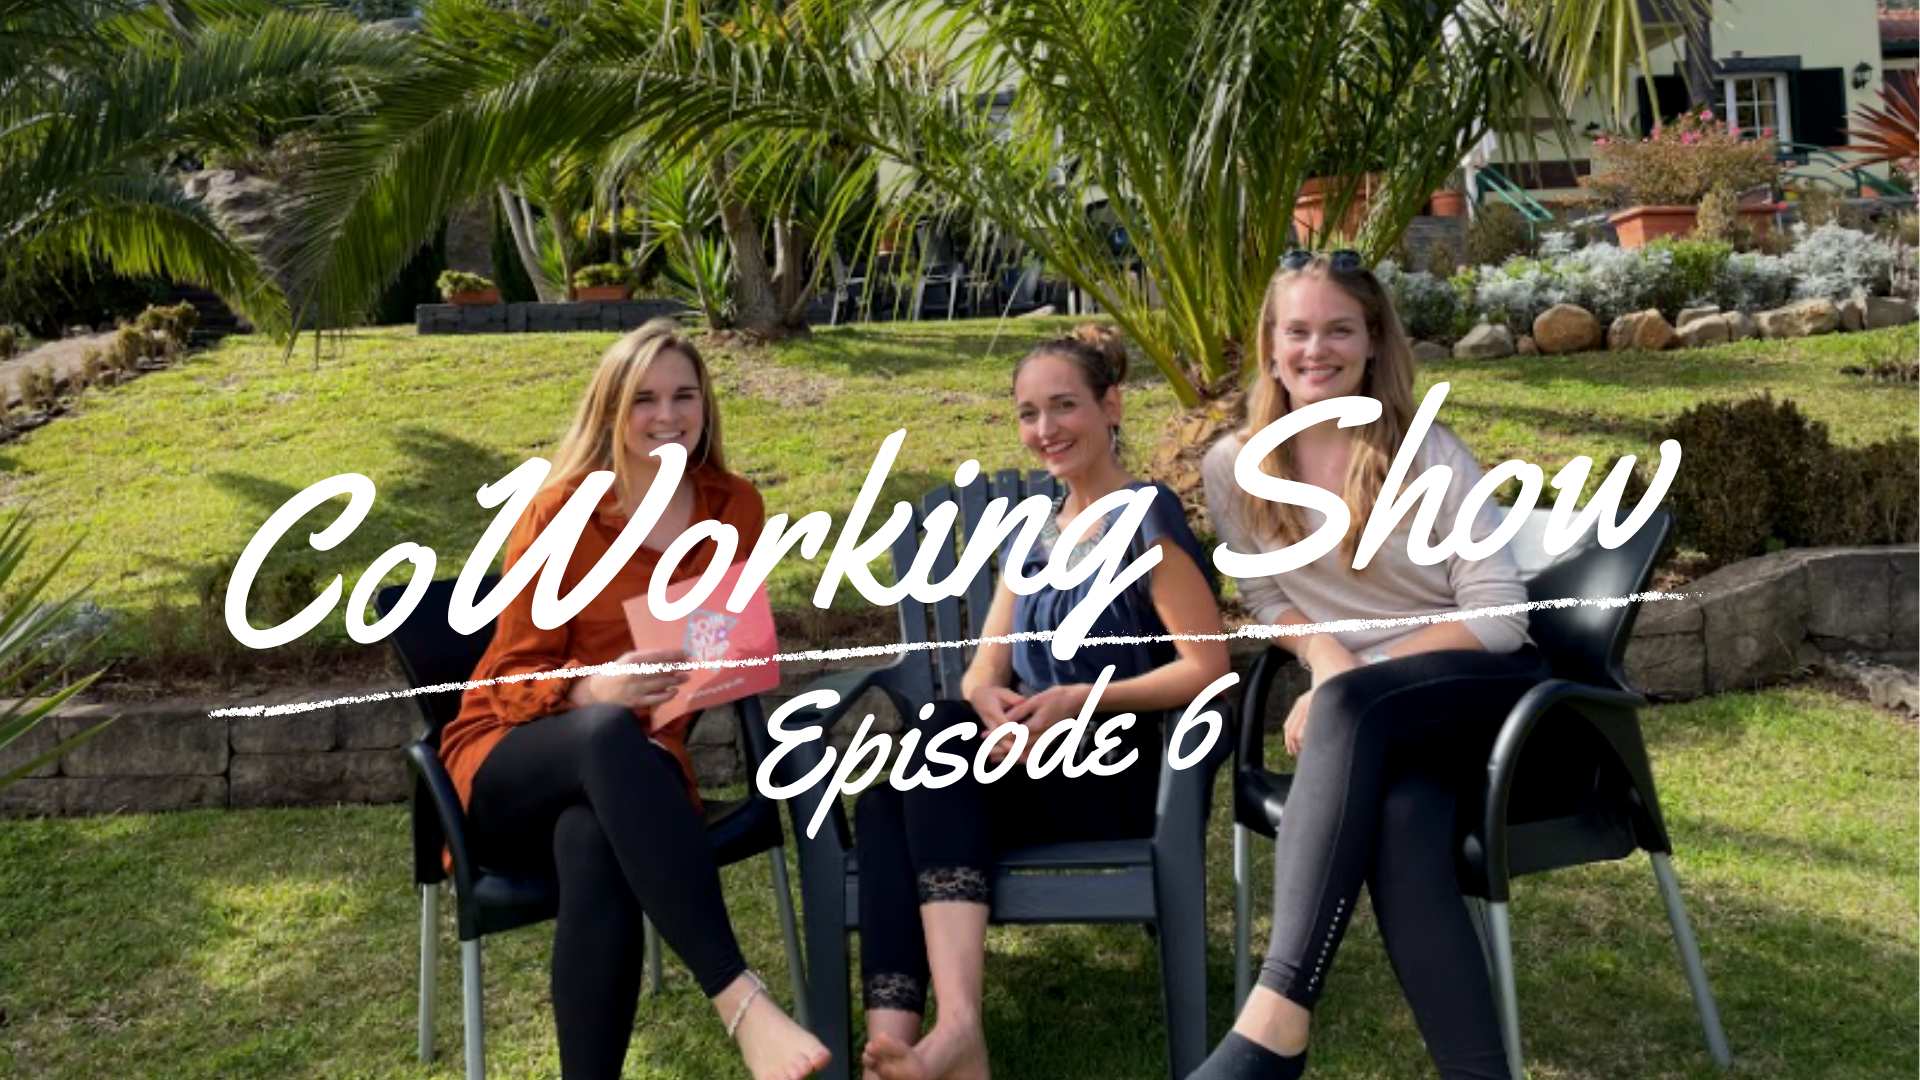 Live CoWorking Erfahrung | CoWorking Show